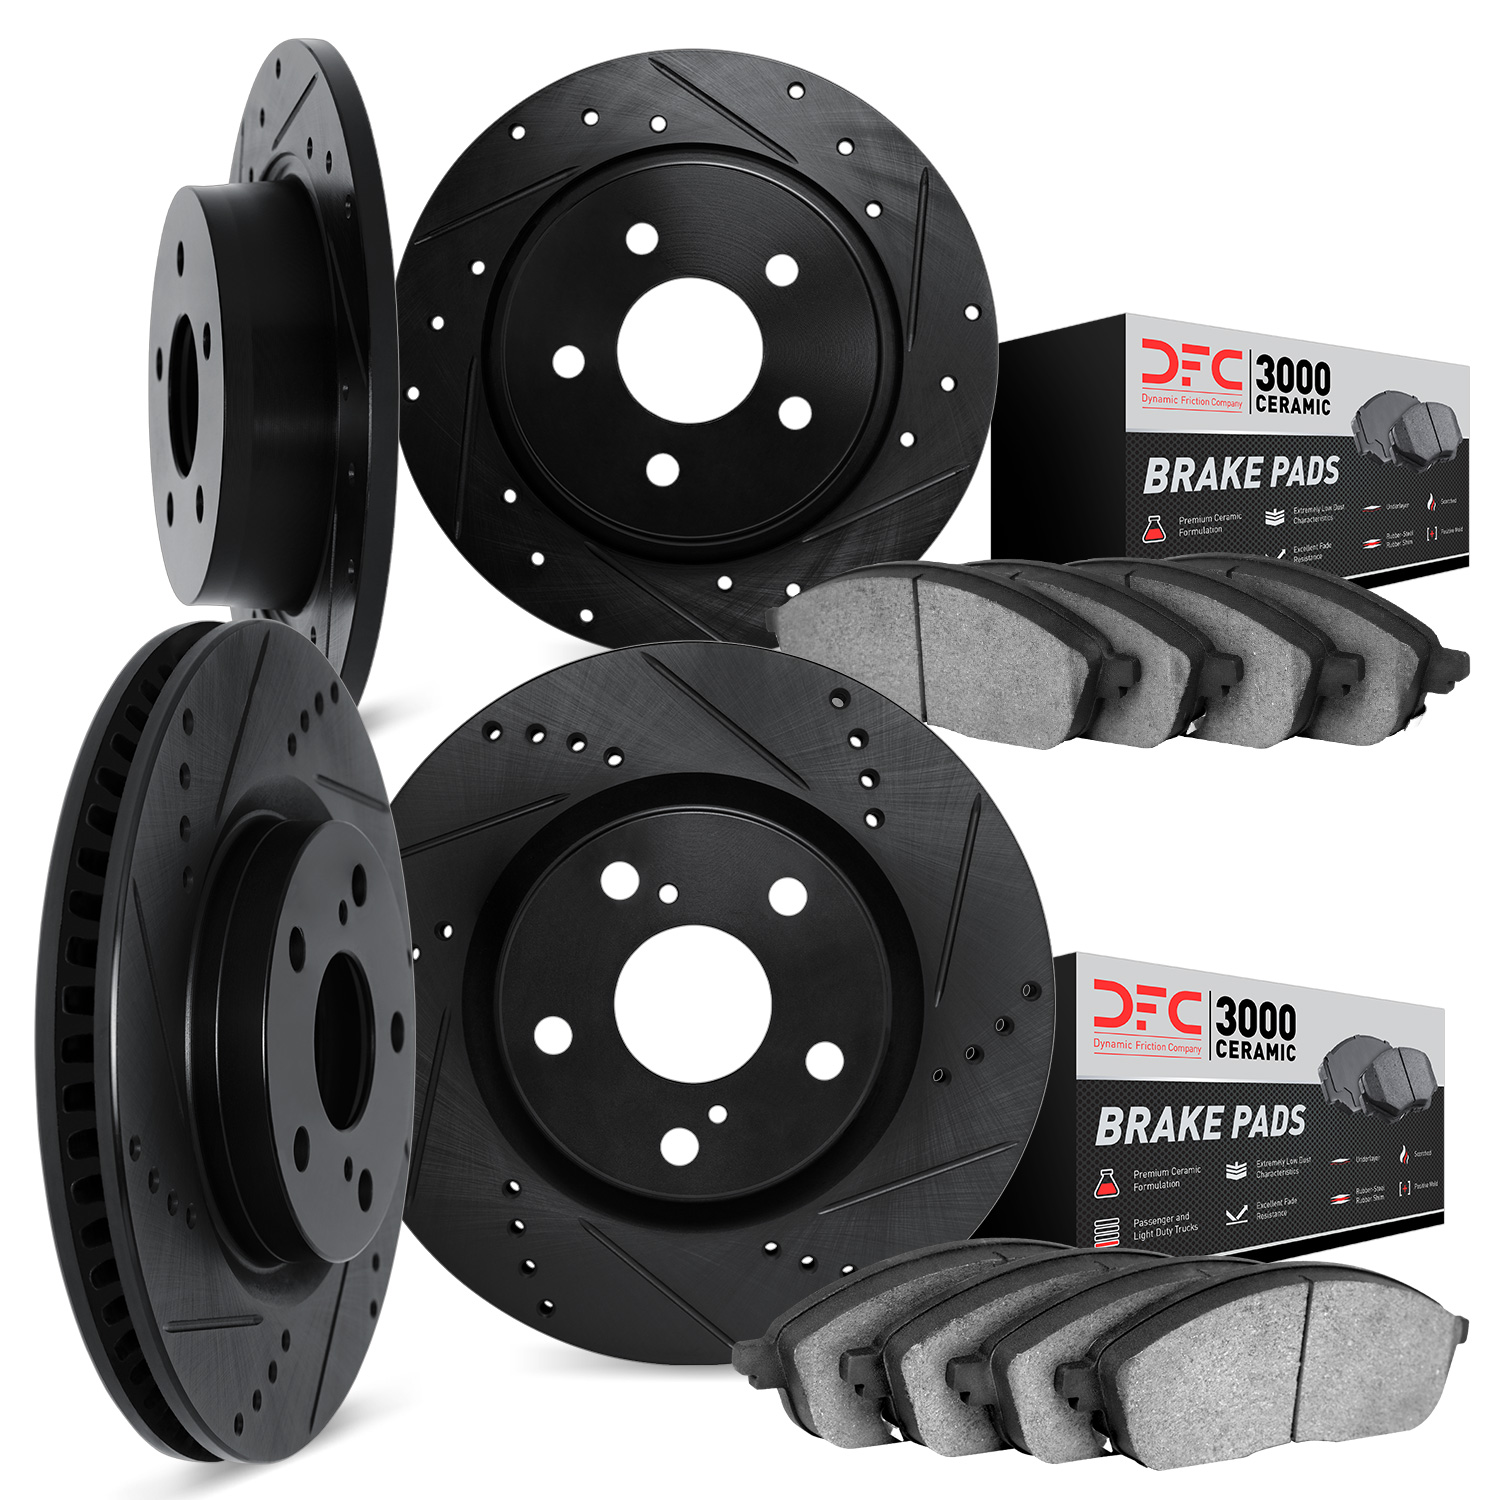 8304-53003 Drilled/Slotted Brake Rotors with 3000-Series Ceramic Brake Pads Kit [Black], 2006-2010 GM, Position: Front and Rear